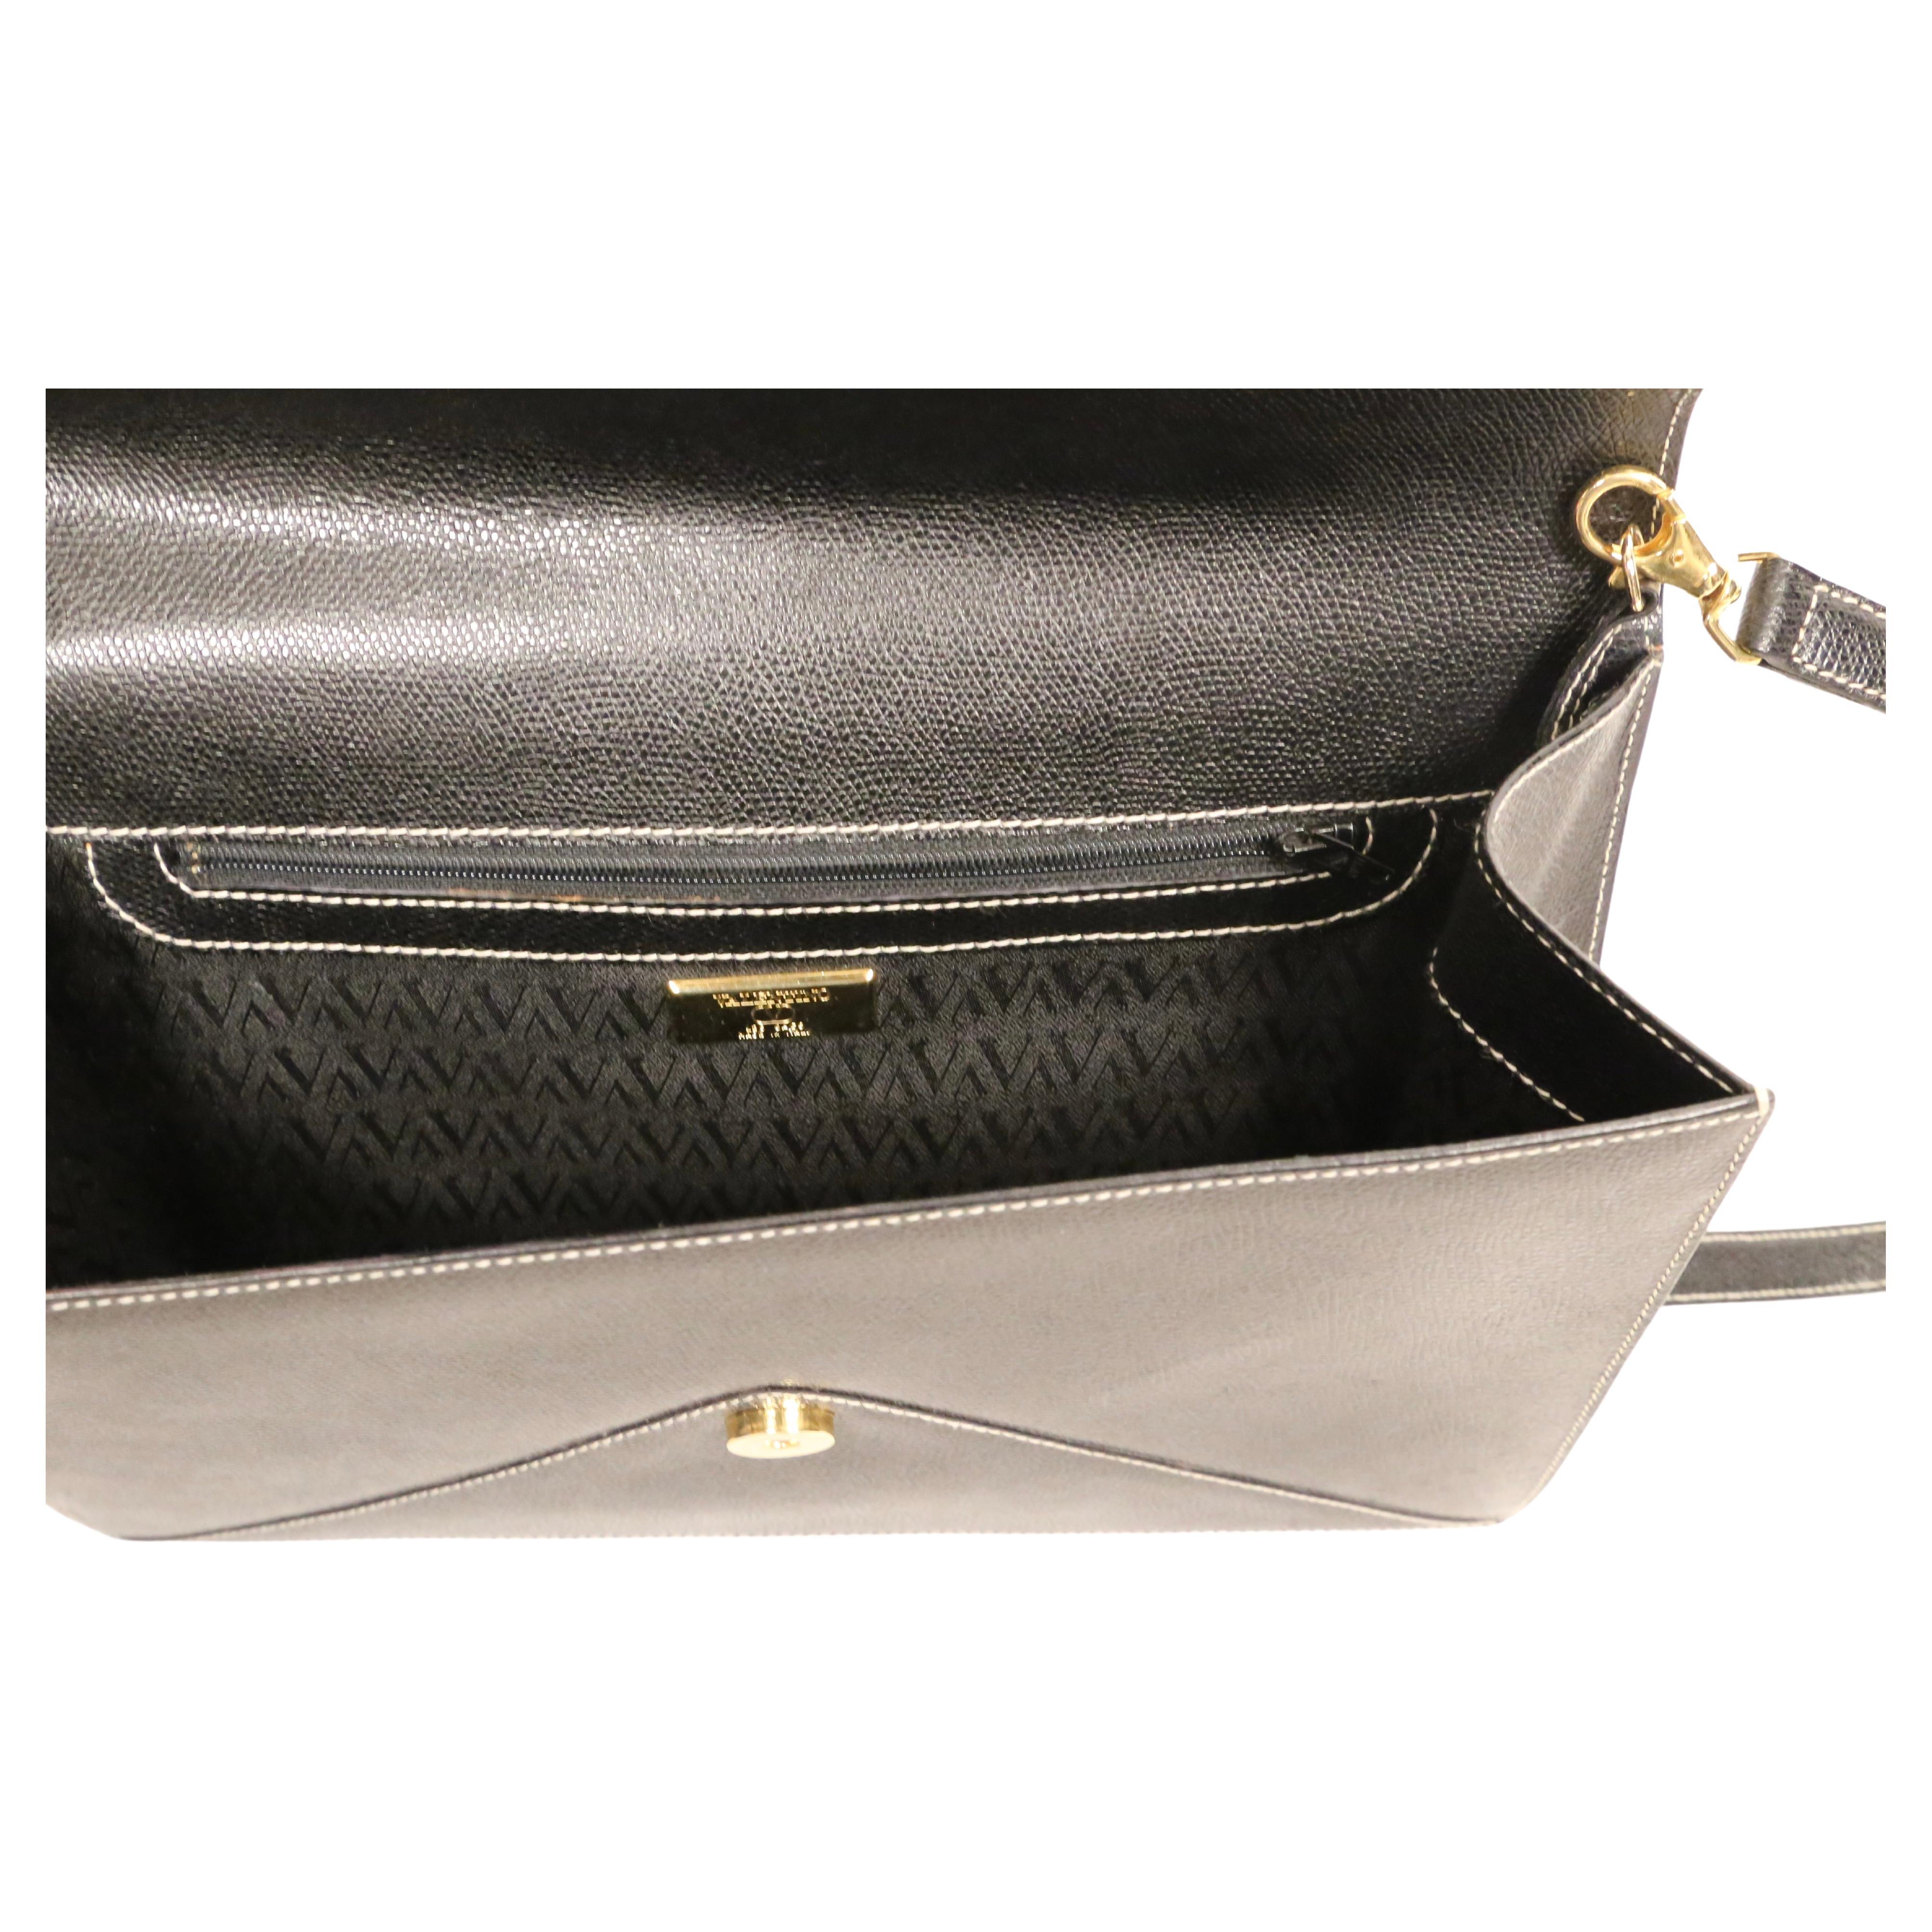  1990's VALENTINO black textured leather convertible 'envelope' clutch bag For Sale 2